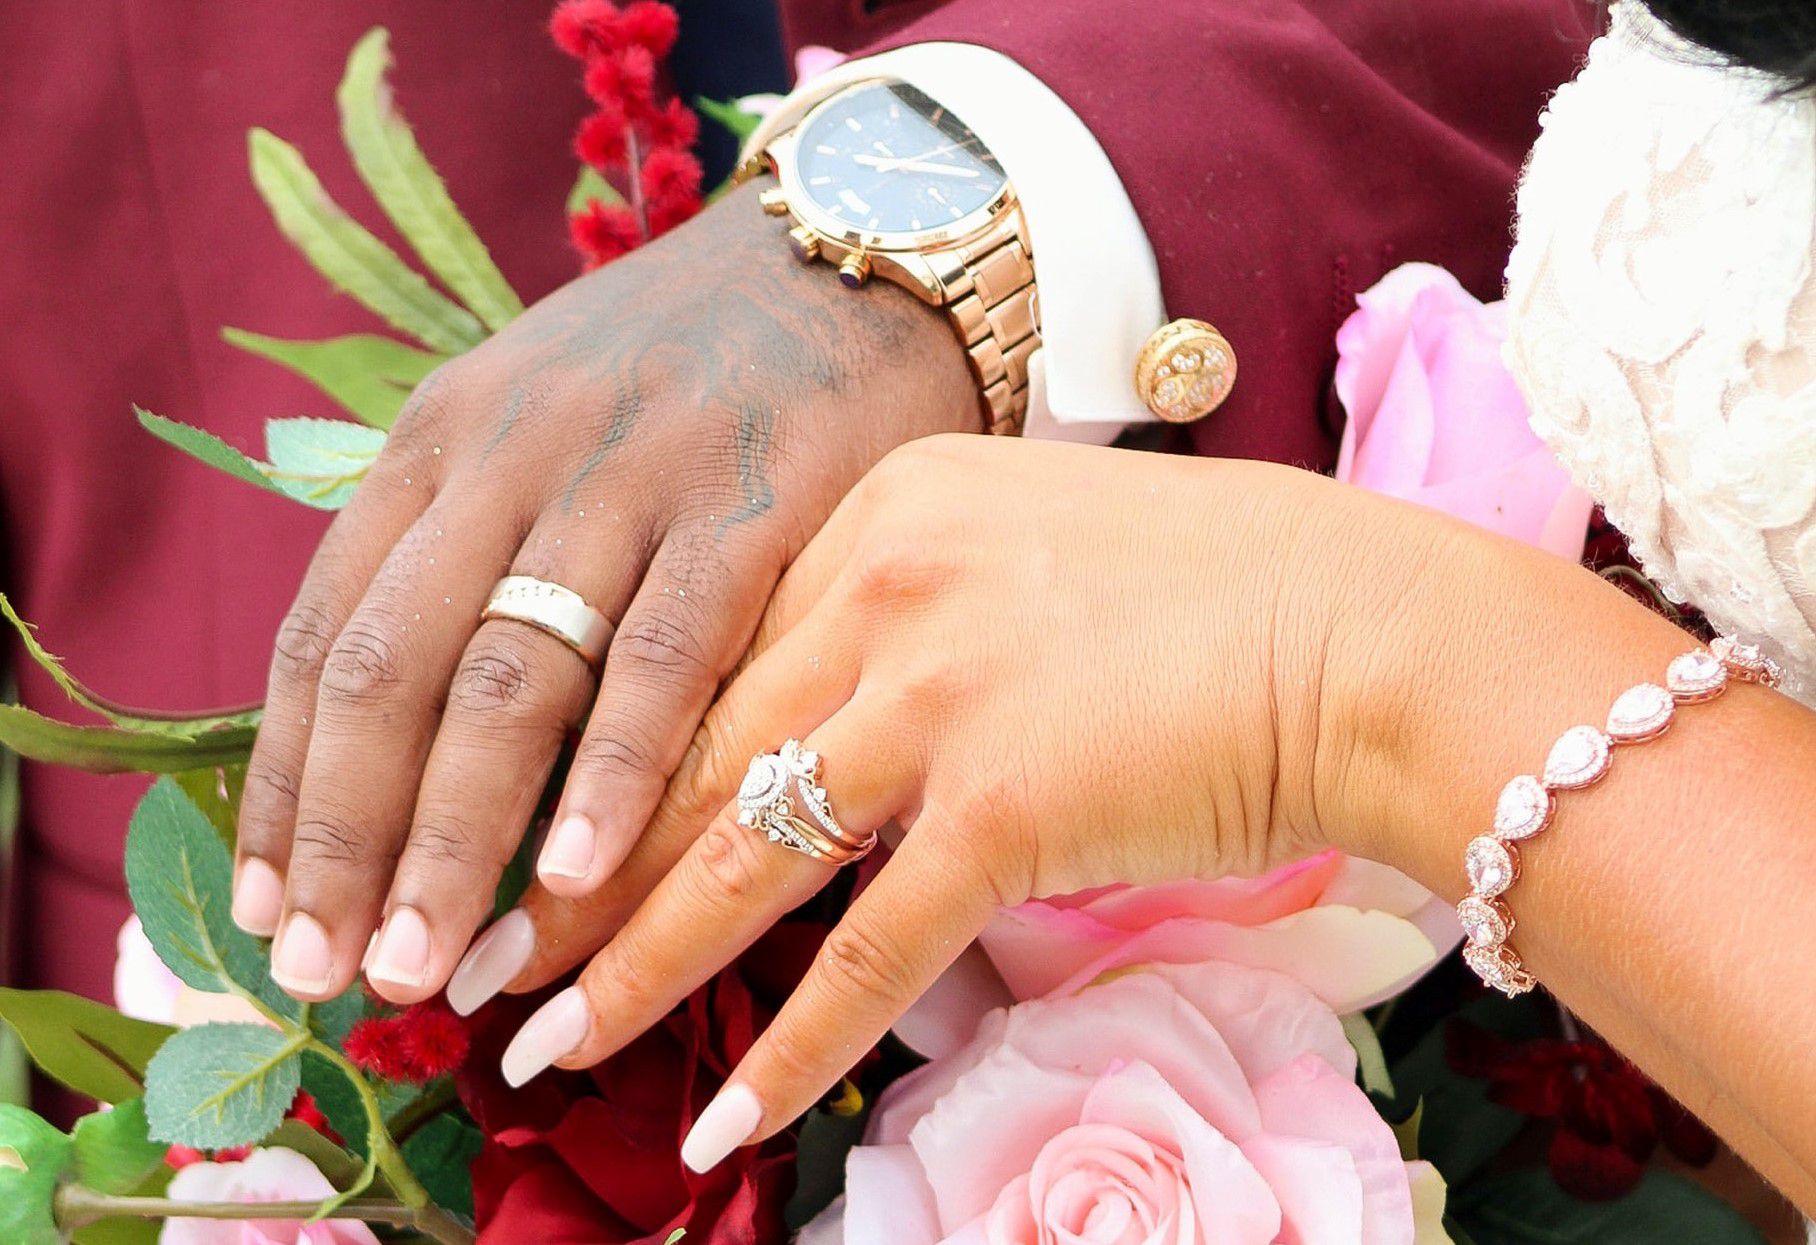 Do you wear your engagement ring when you get married? | Steven Stone